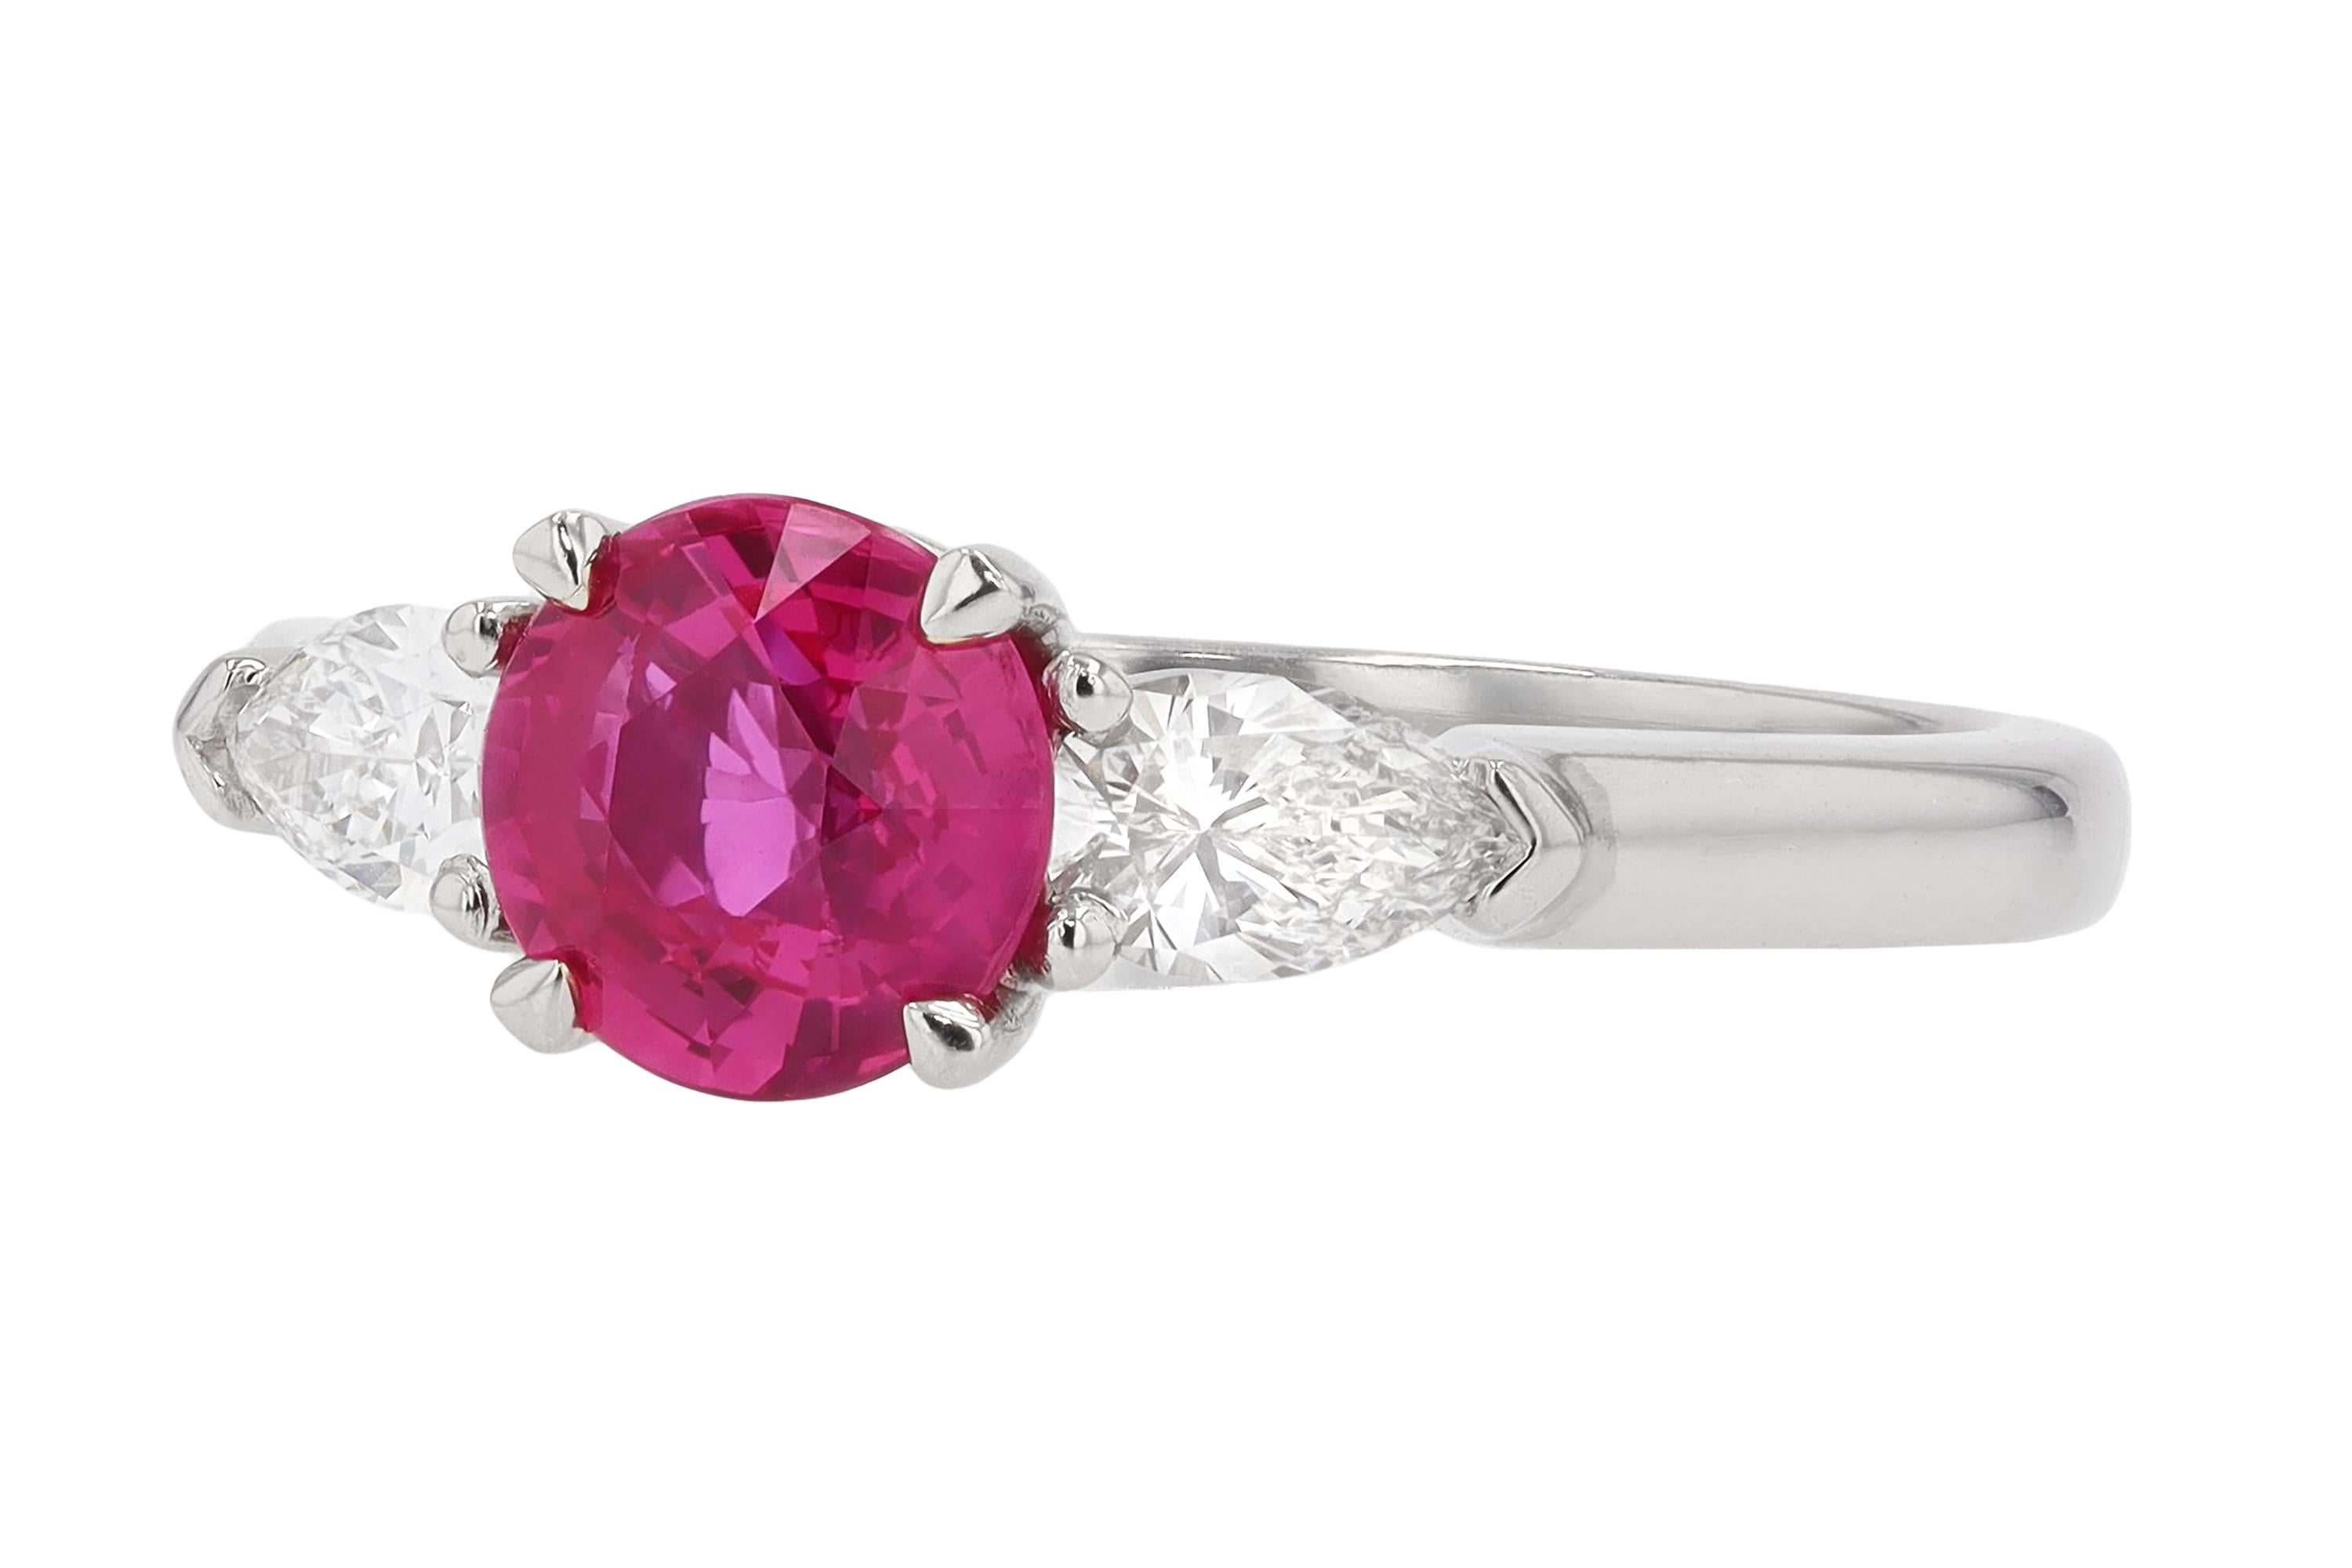 Vintage 3 Stone Ruby Diamond Gemstone Engagement Ring In Excellent Condition For Sale In Santa Barbara, CA